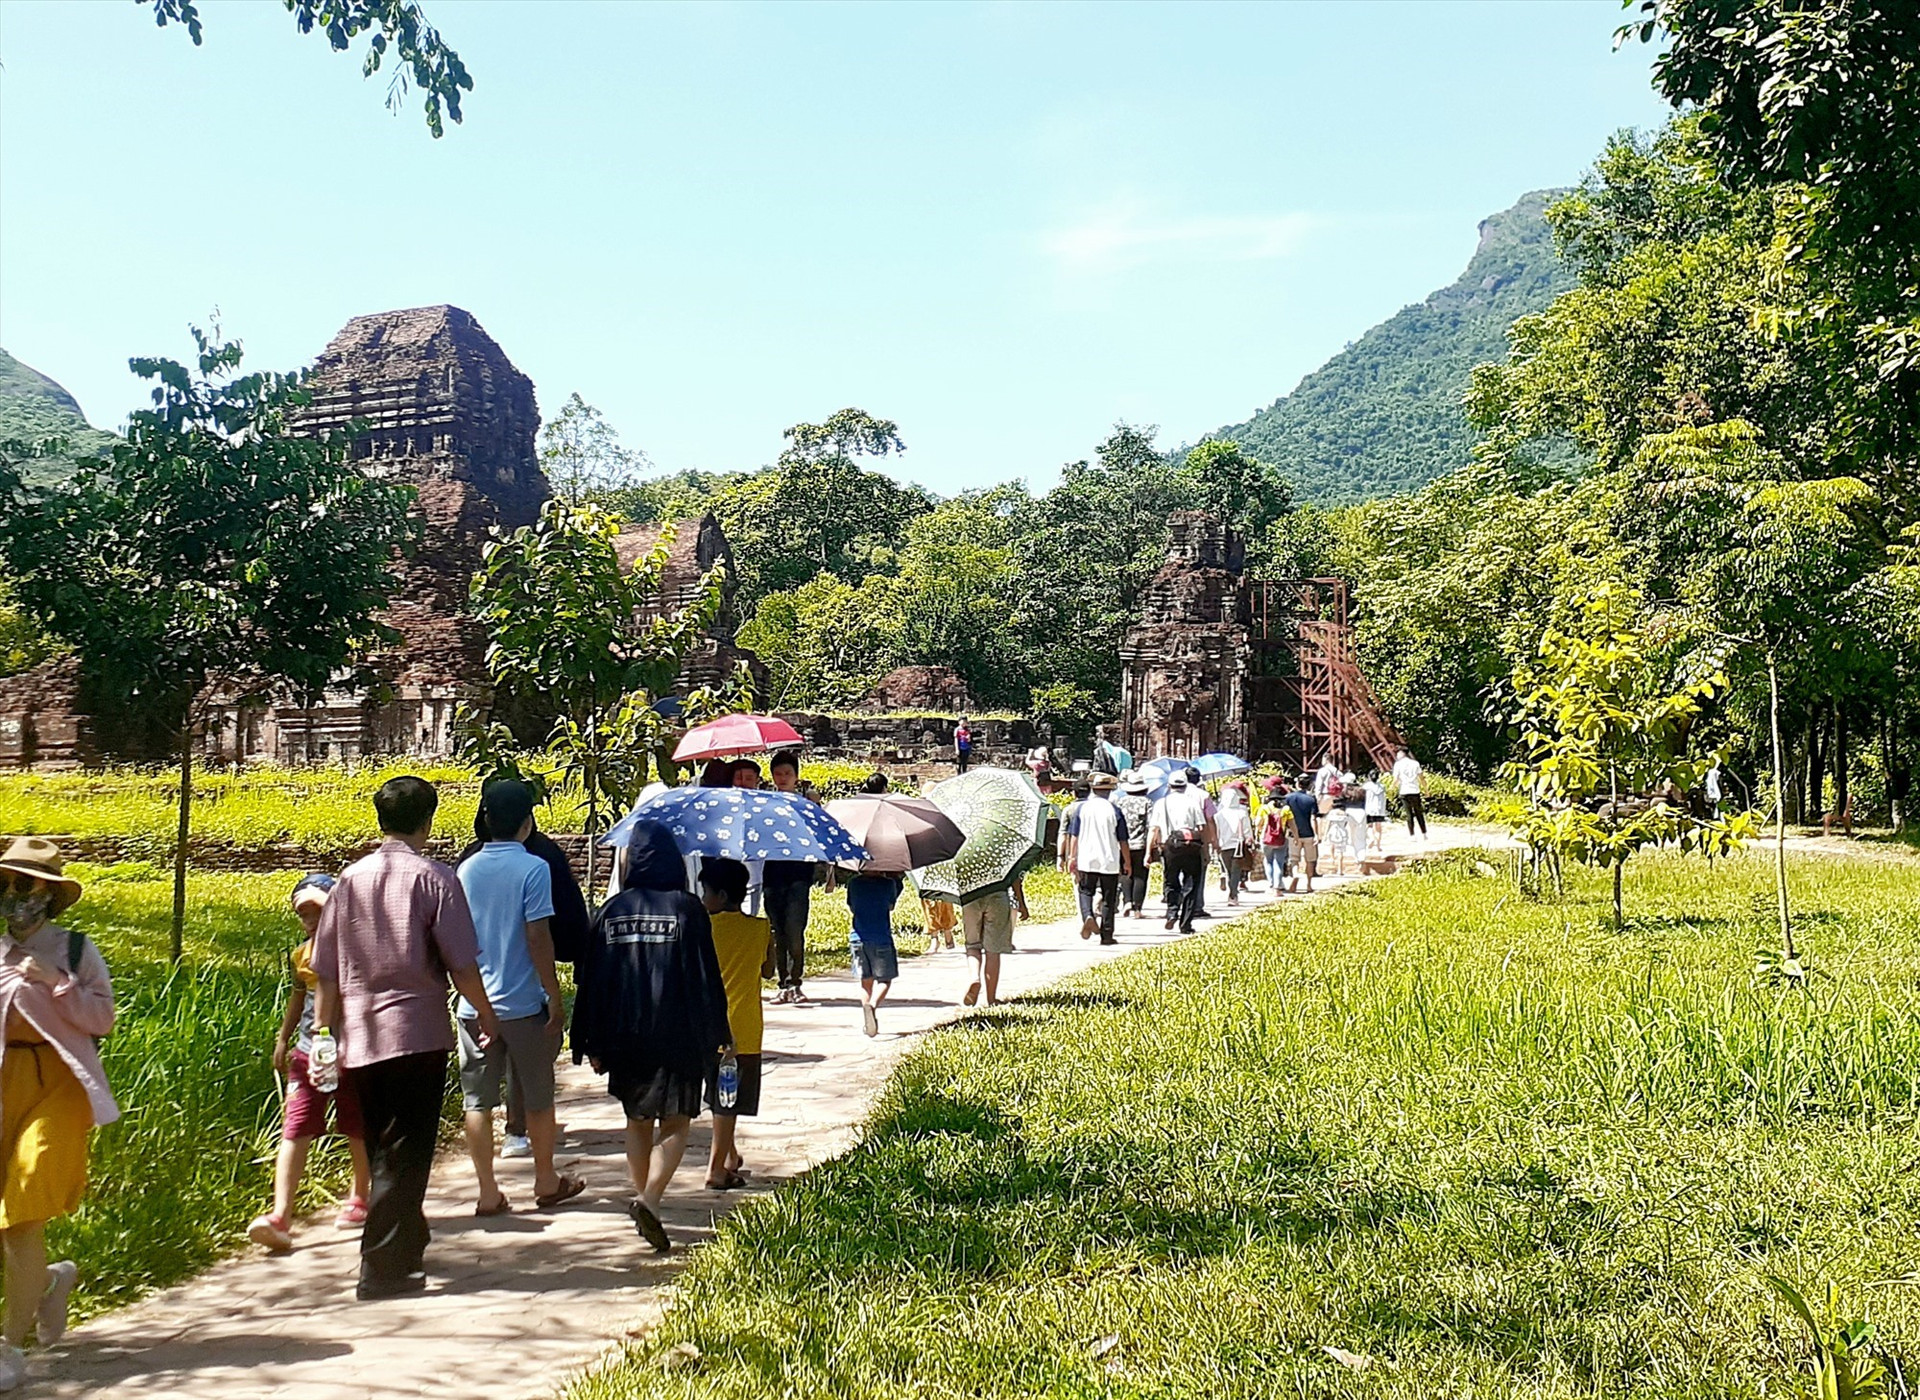 Tourists to My Son Sanctuary, Quang Nam province